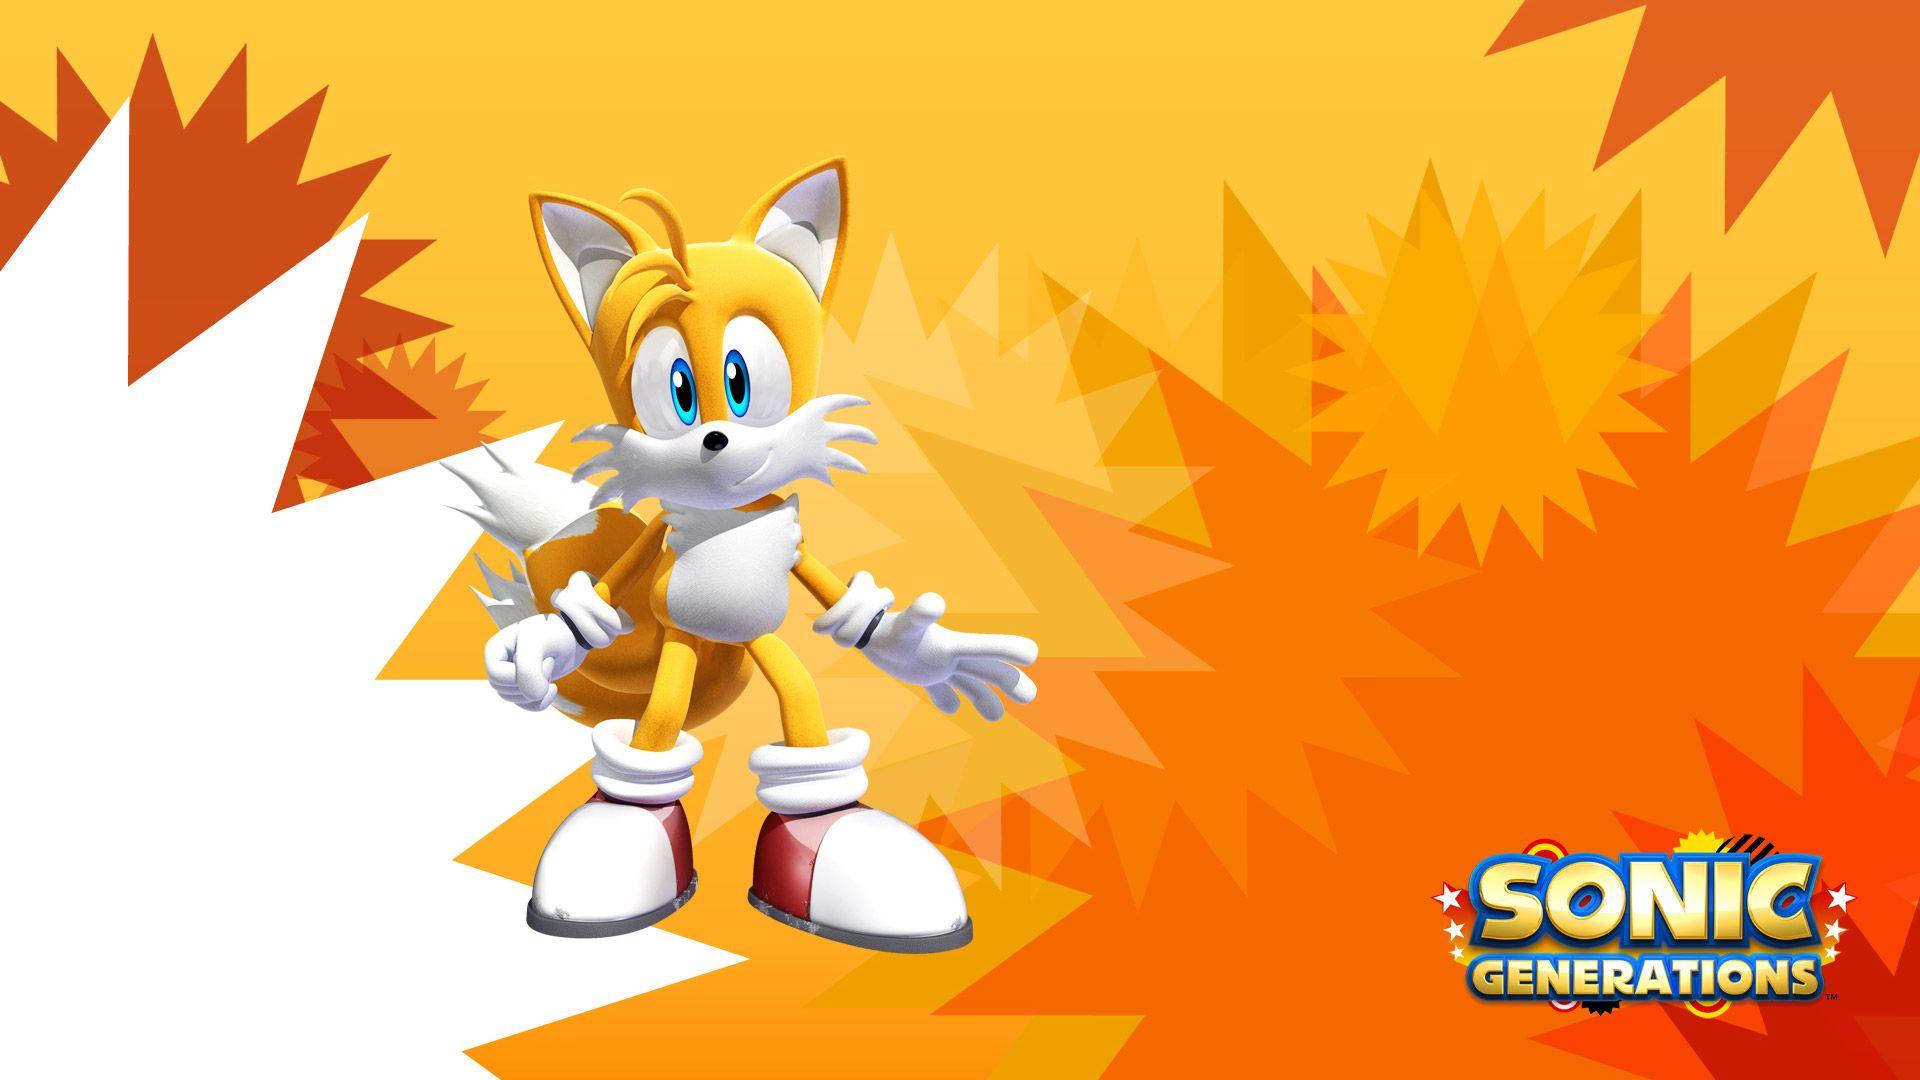 Sonic And Tails Wallpapers